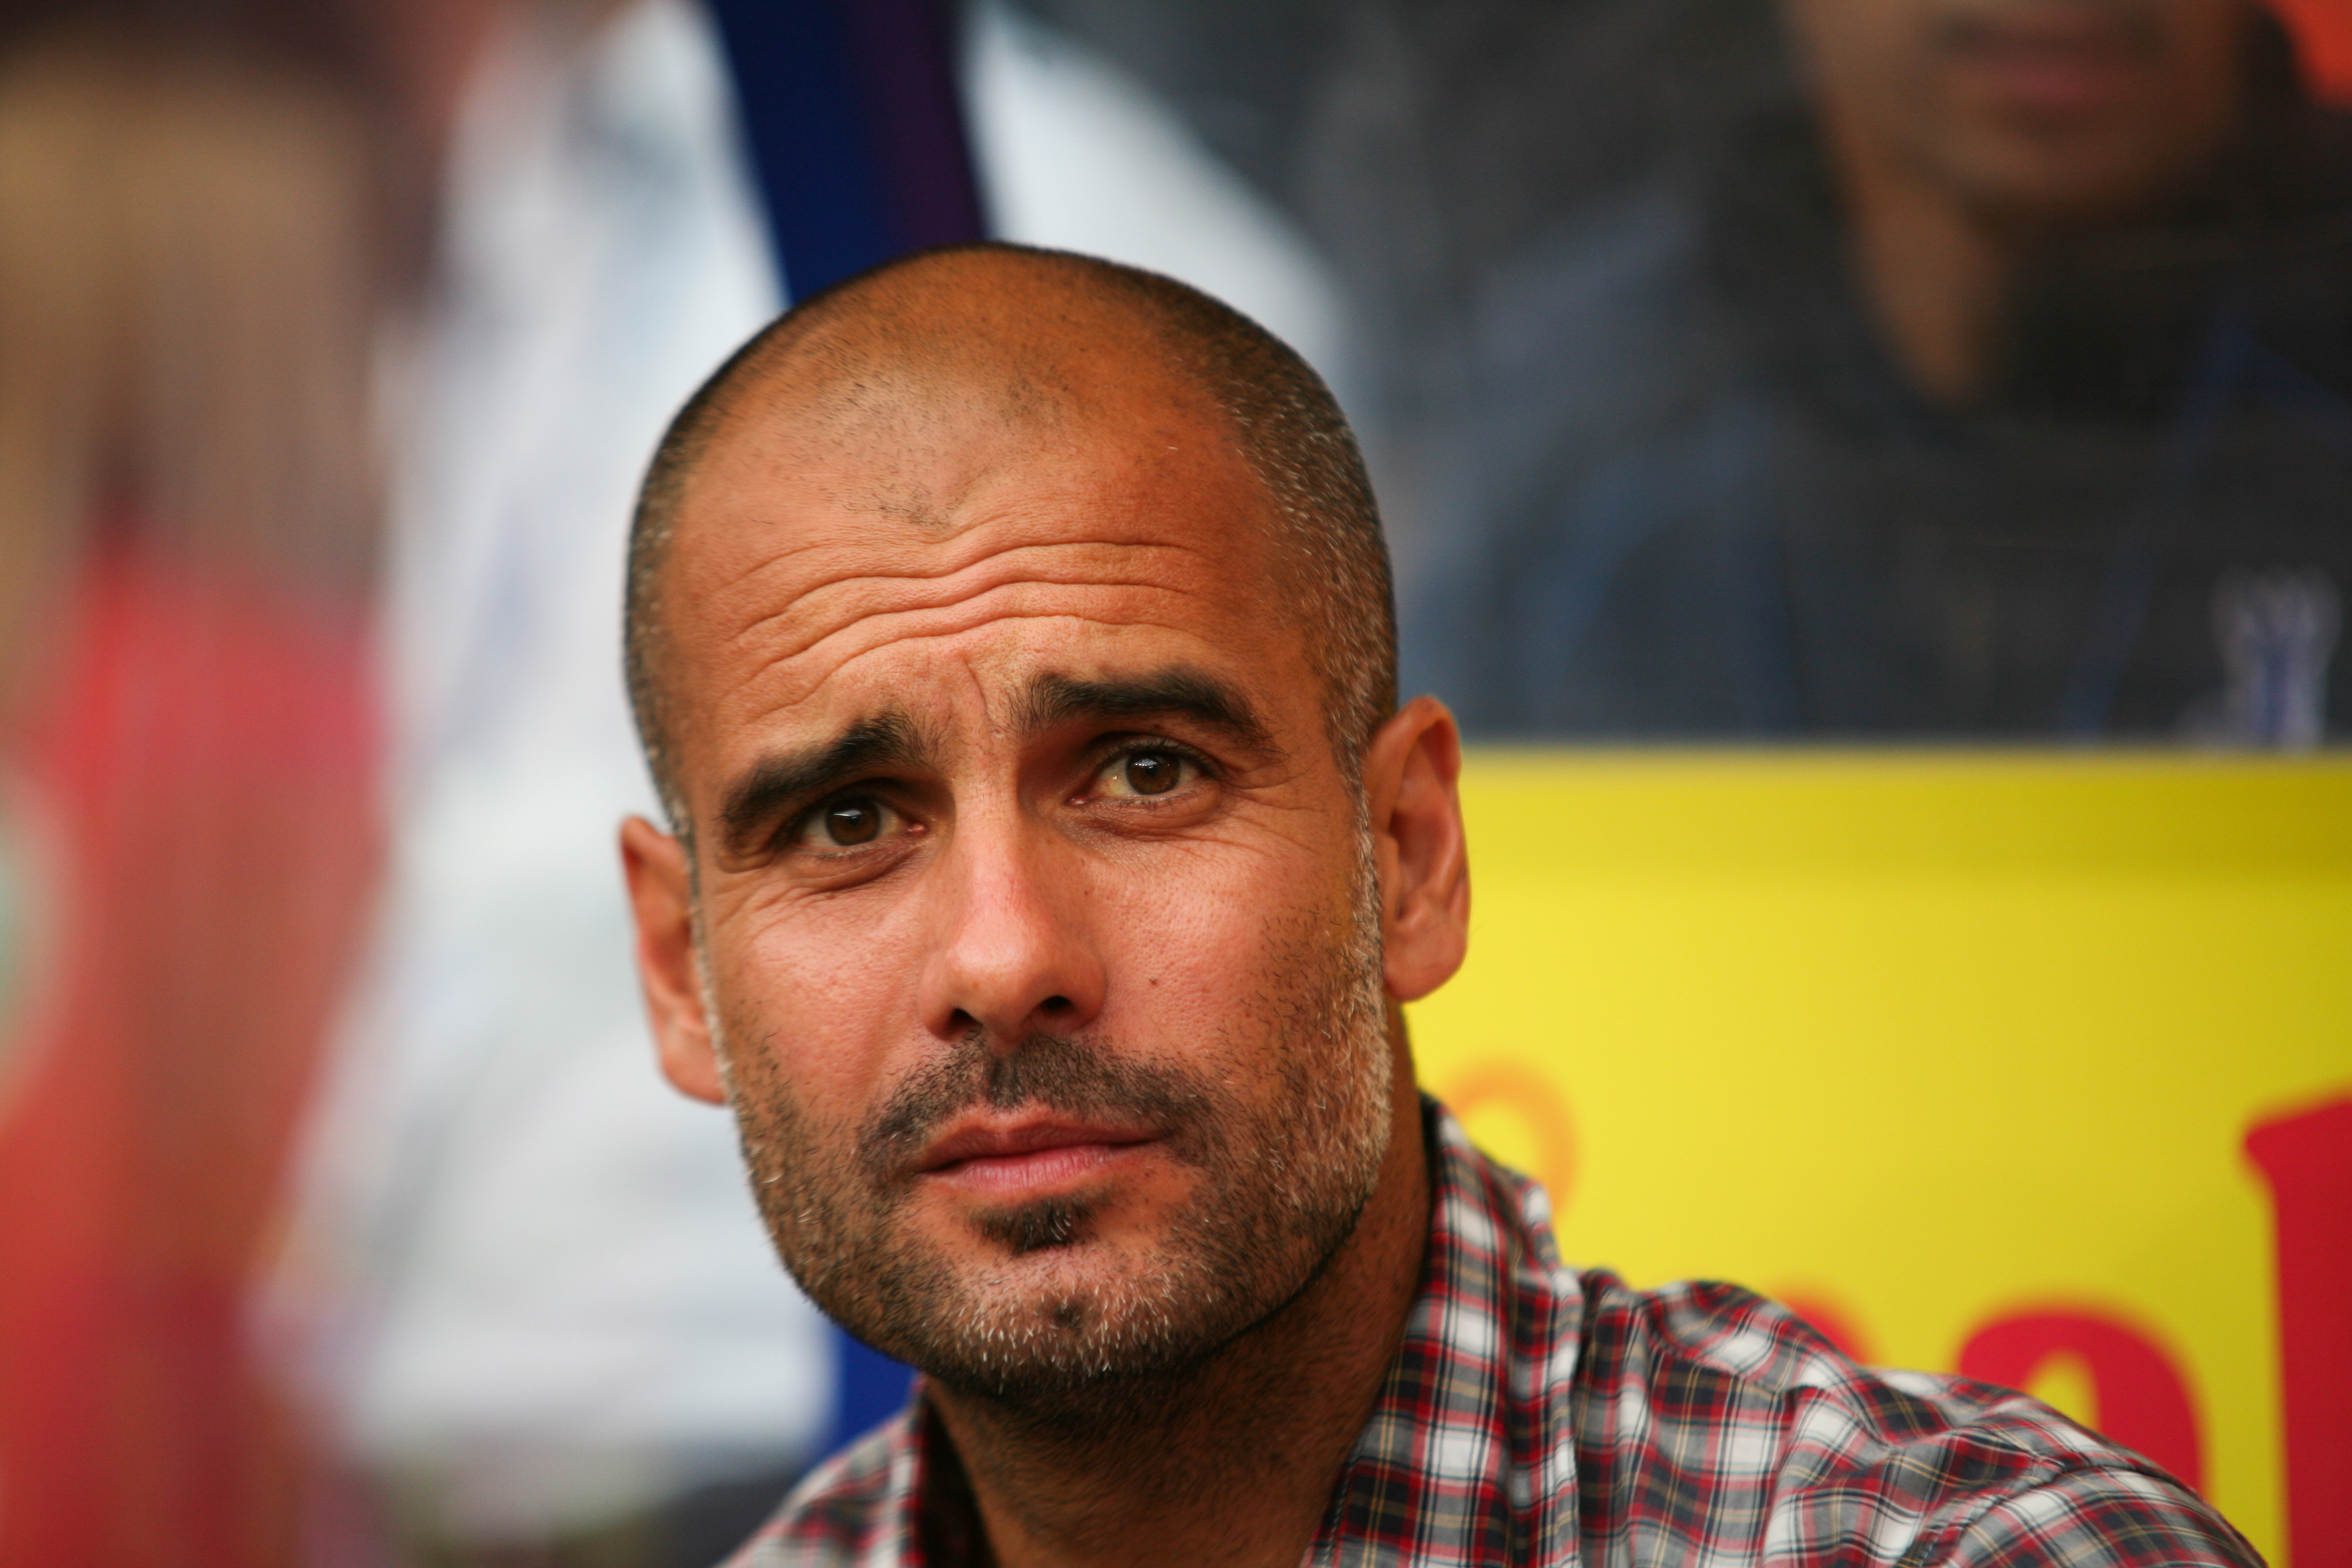 Pep Guardiloa from Manchester City could lead the soccer club to a Premier League victory